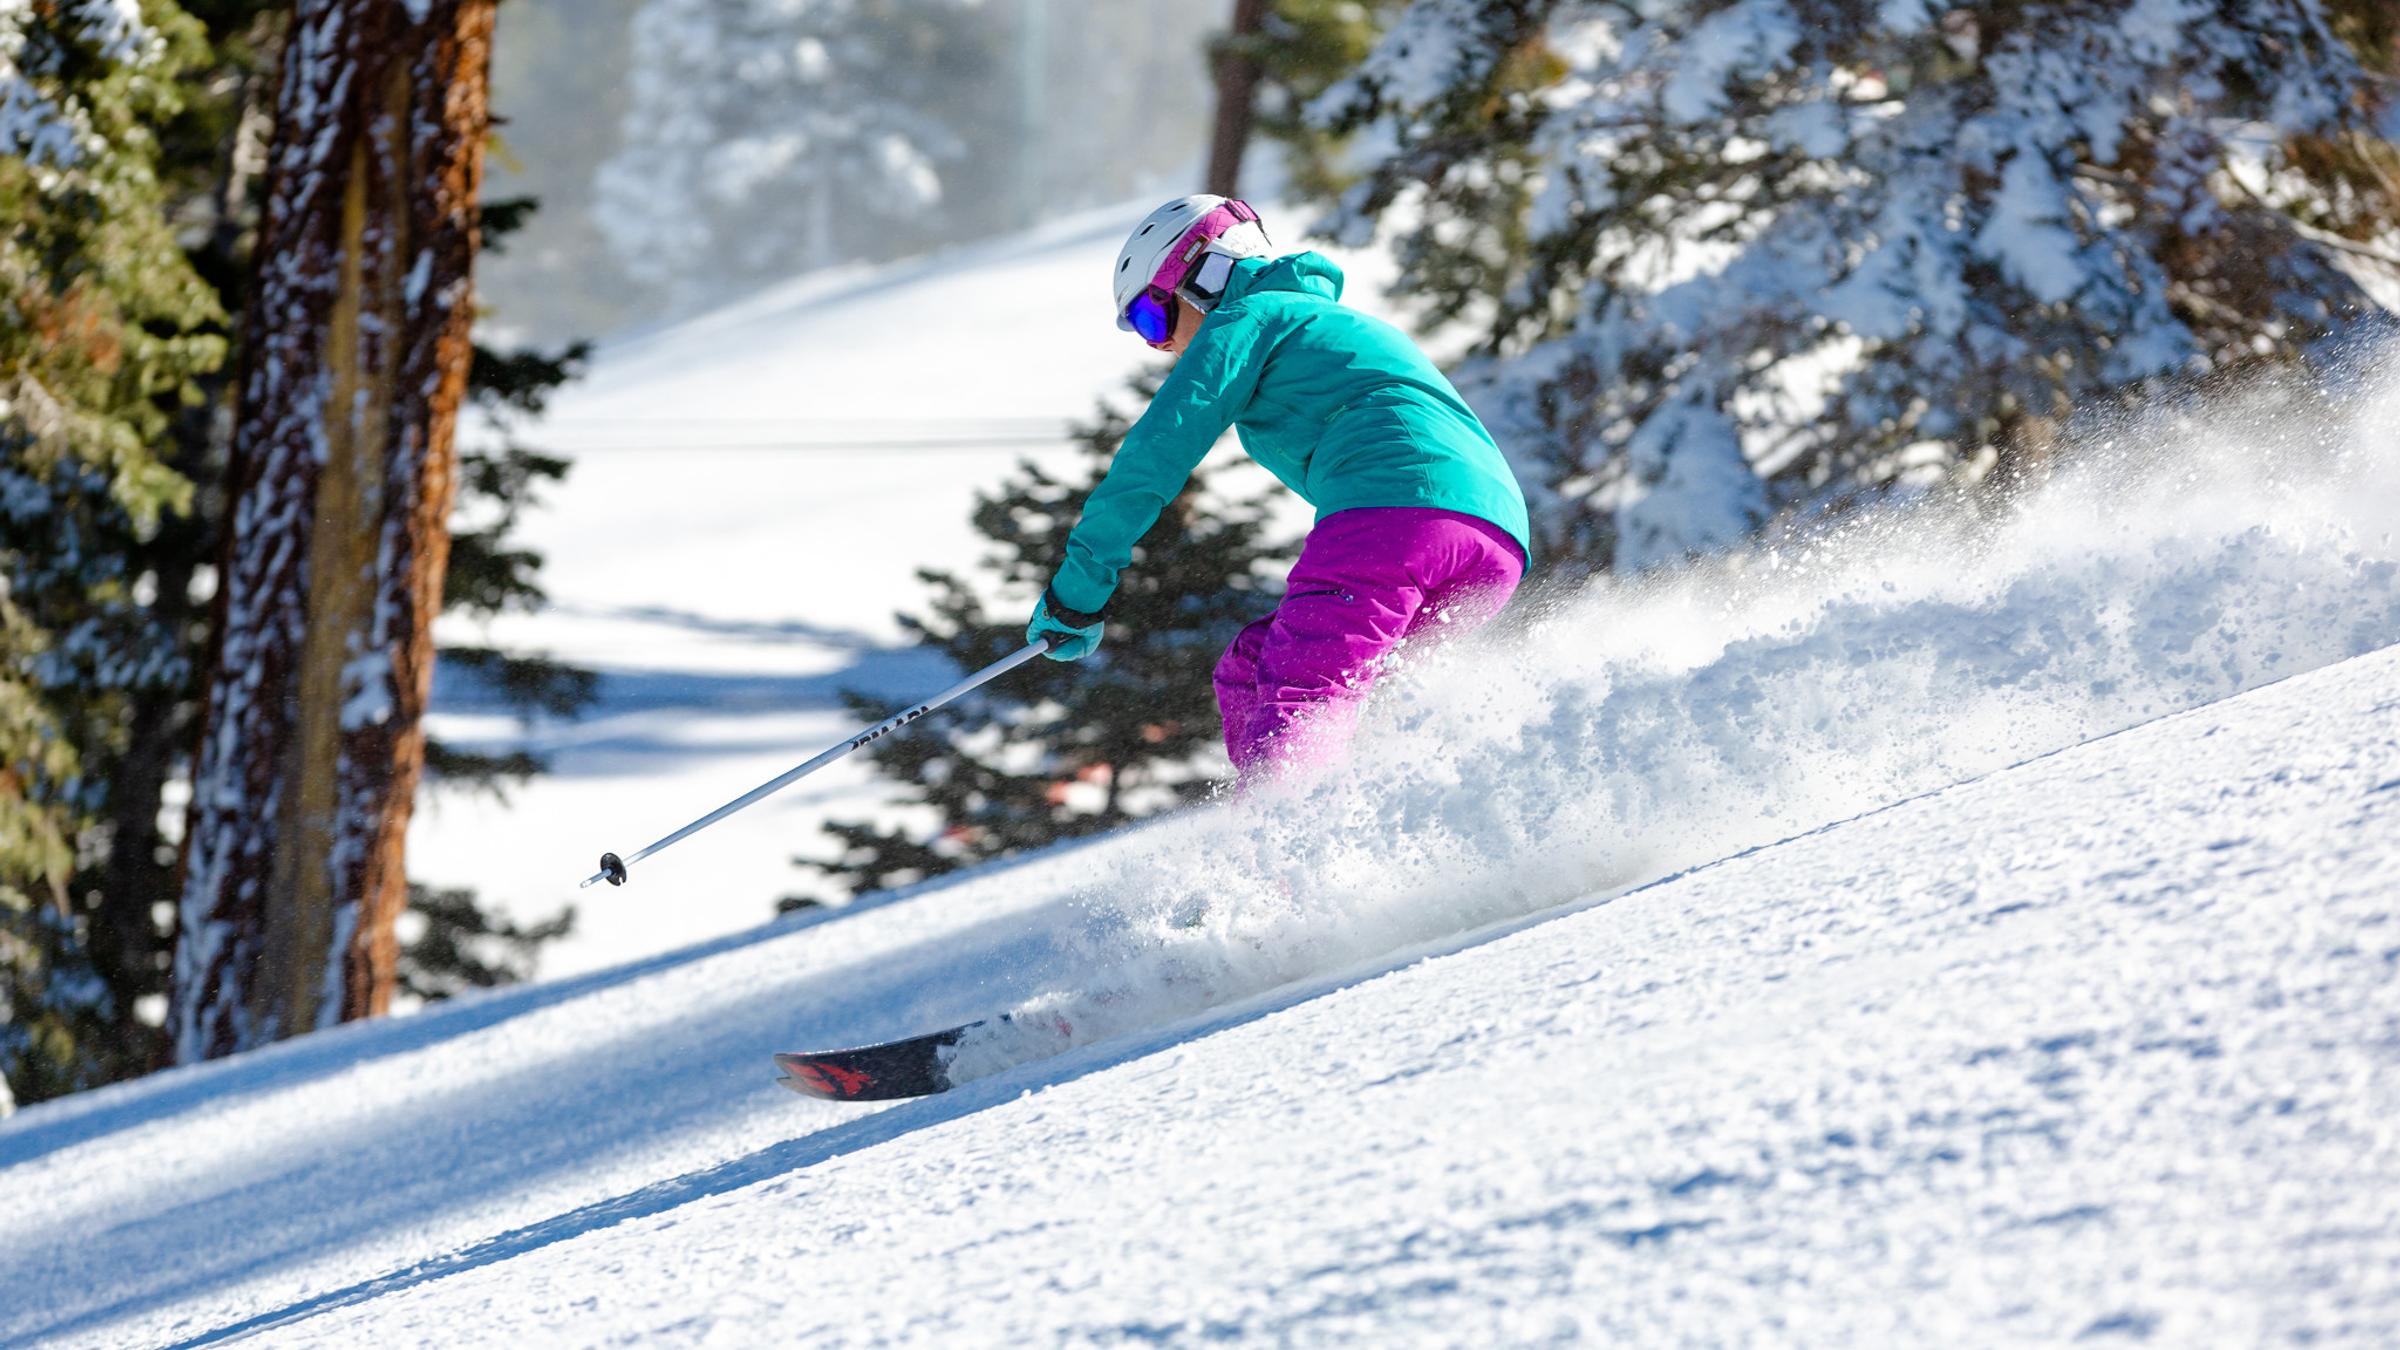 Skier wearing bright green jacket and purple pants going down the ski slope.